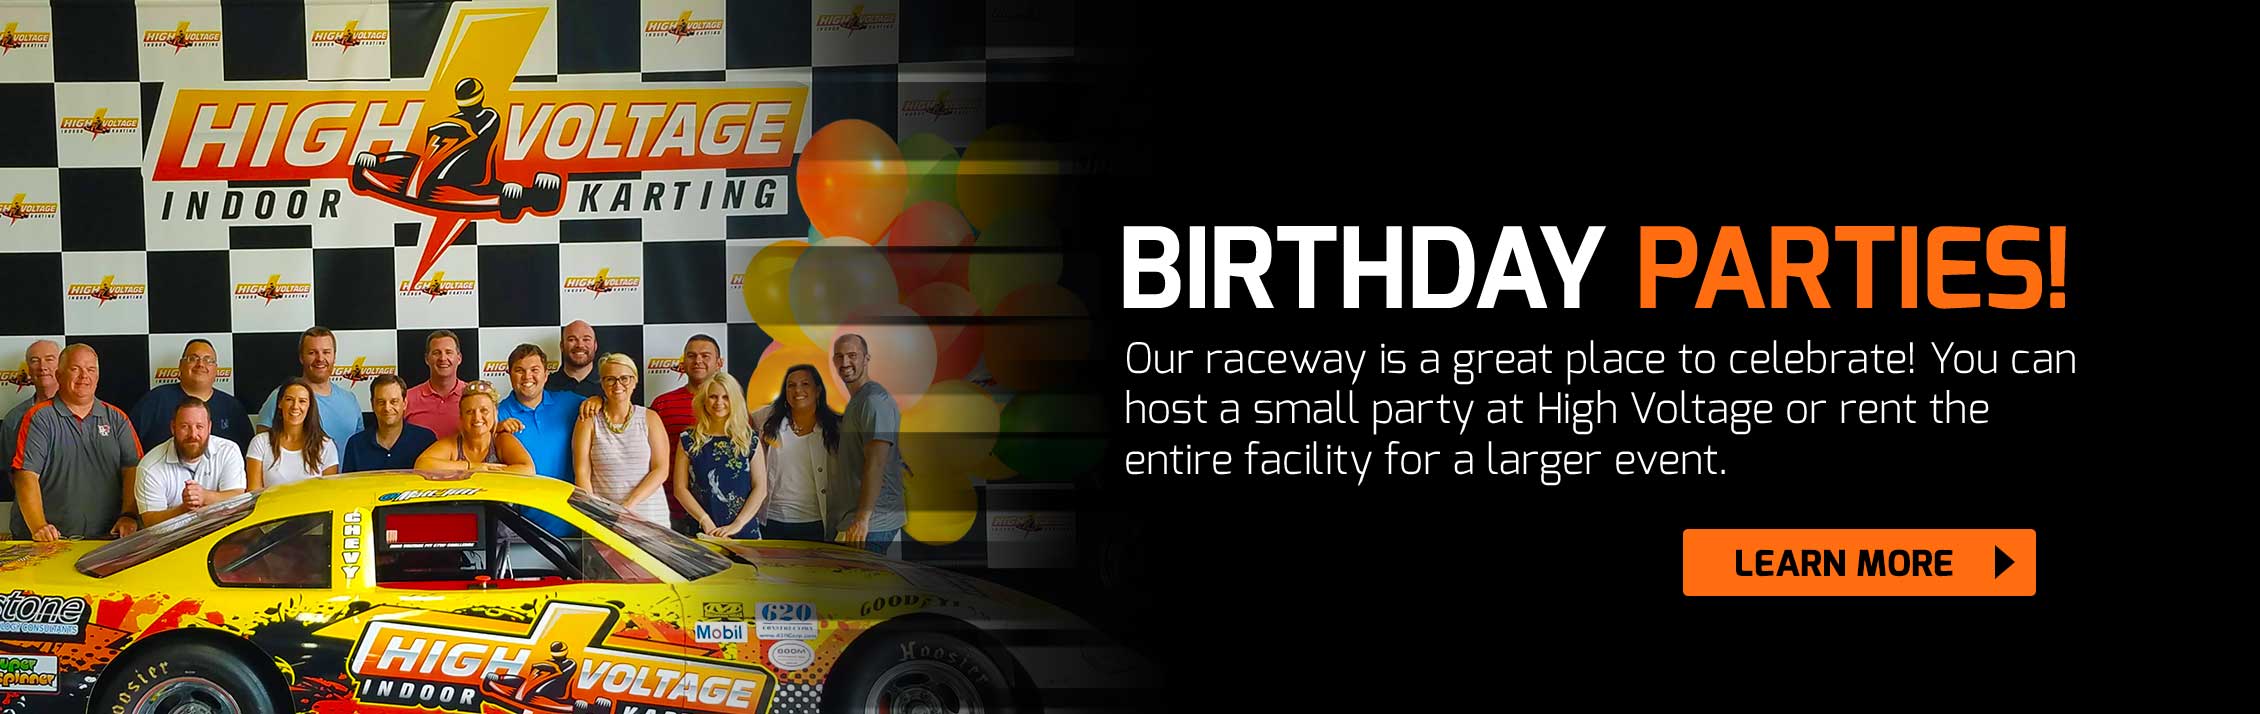 Birthday Parties at High Voltage Indoor Karting, near me in Cleveland, Ohio